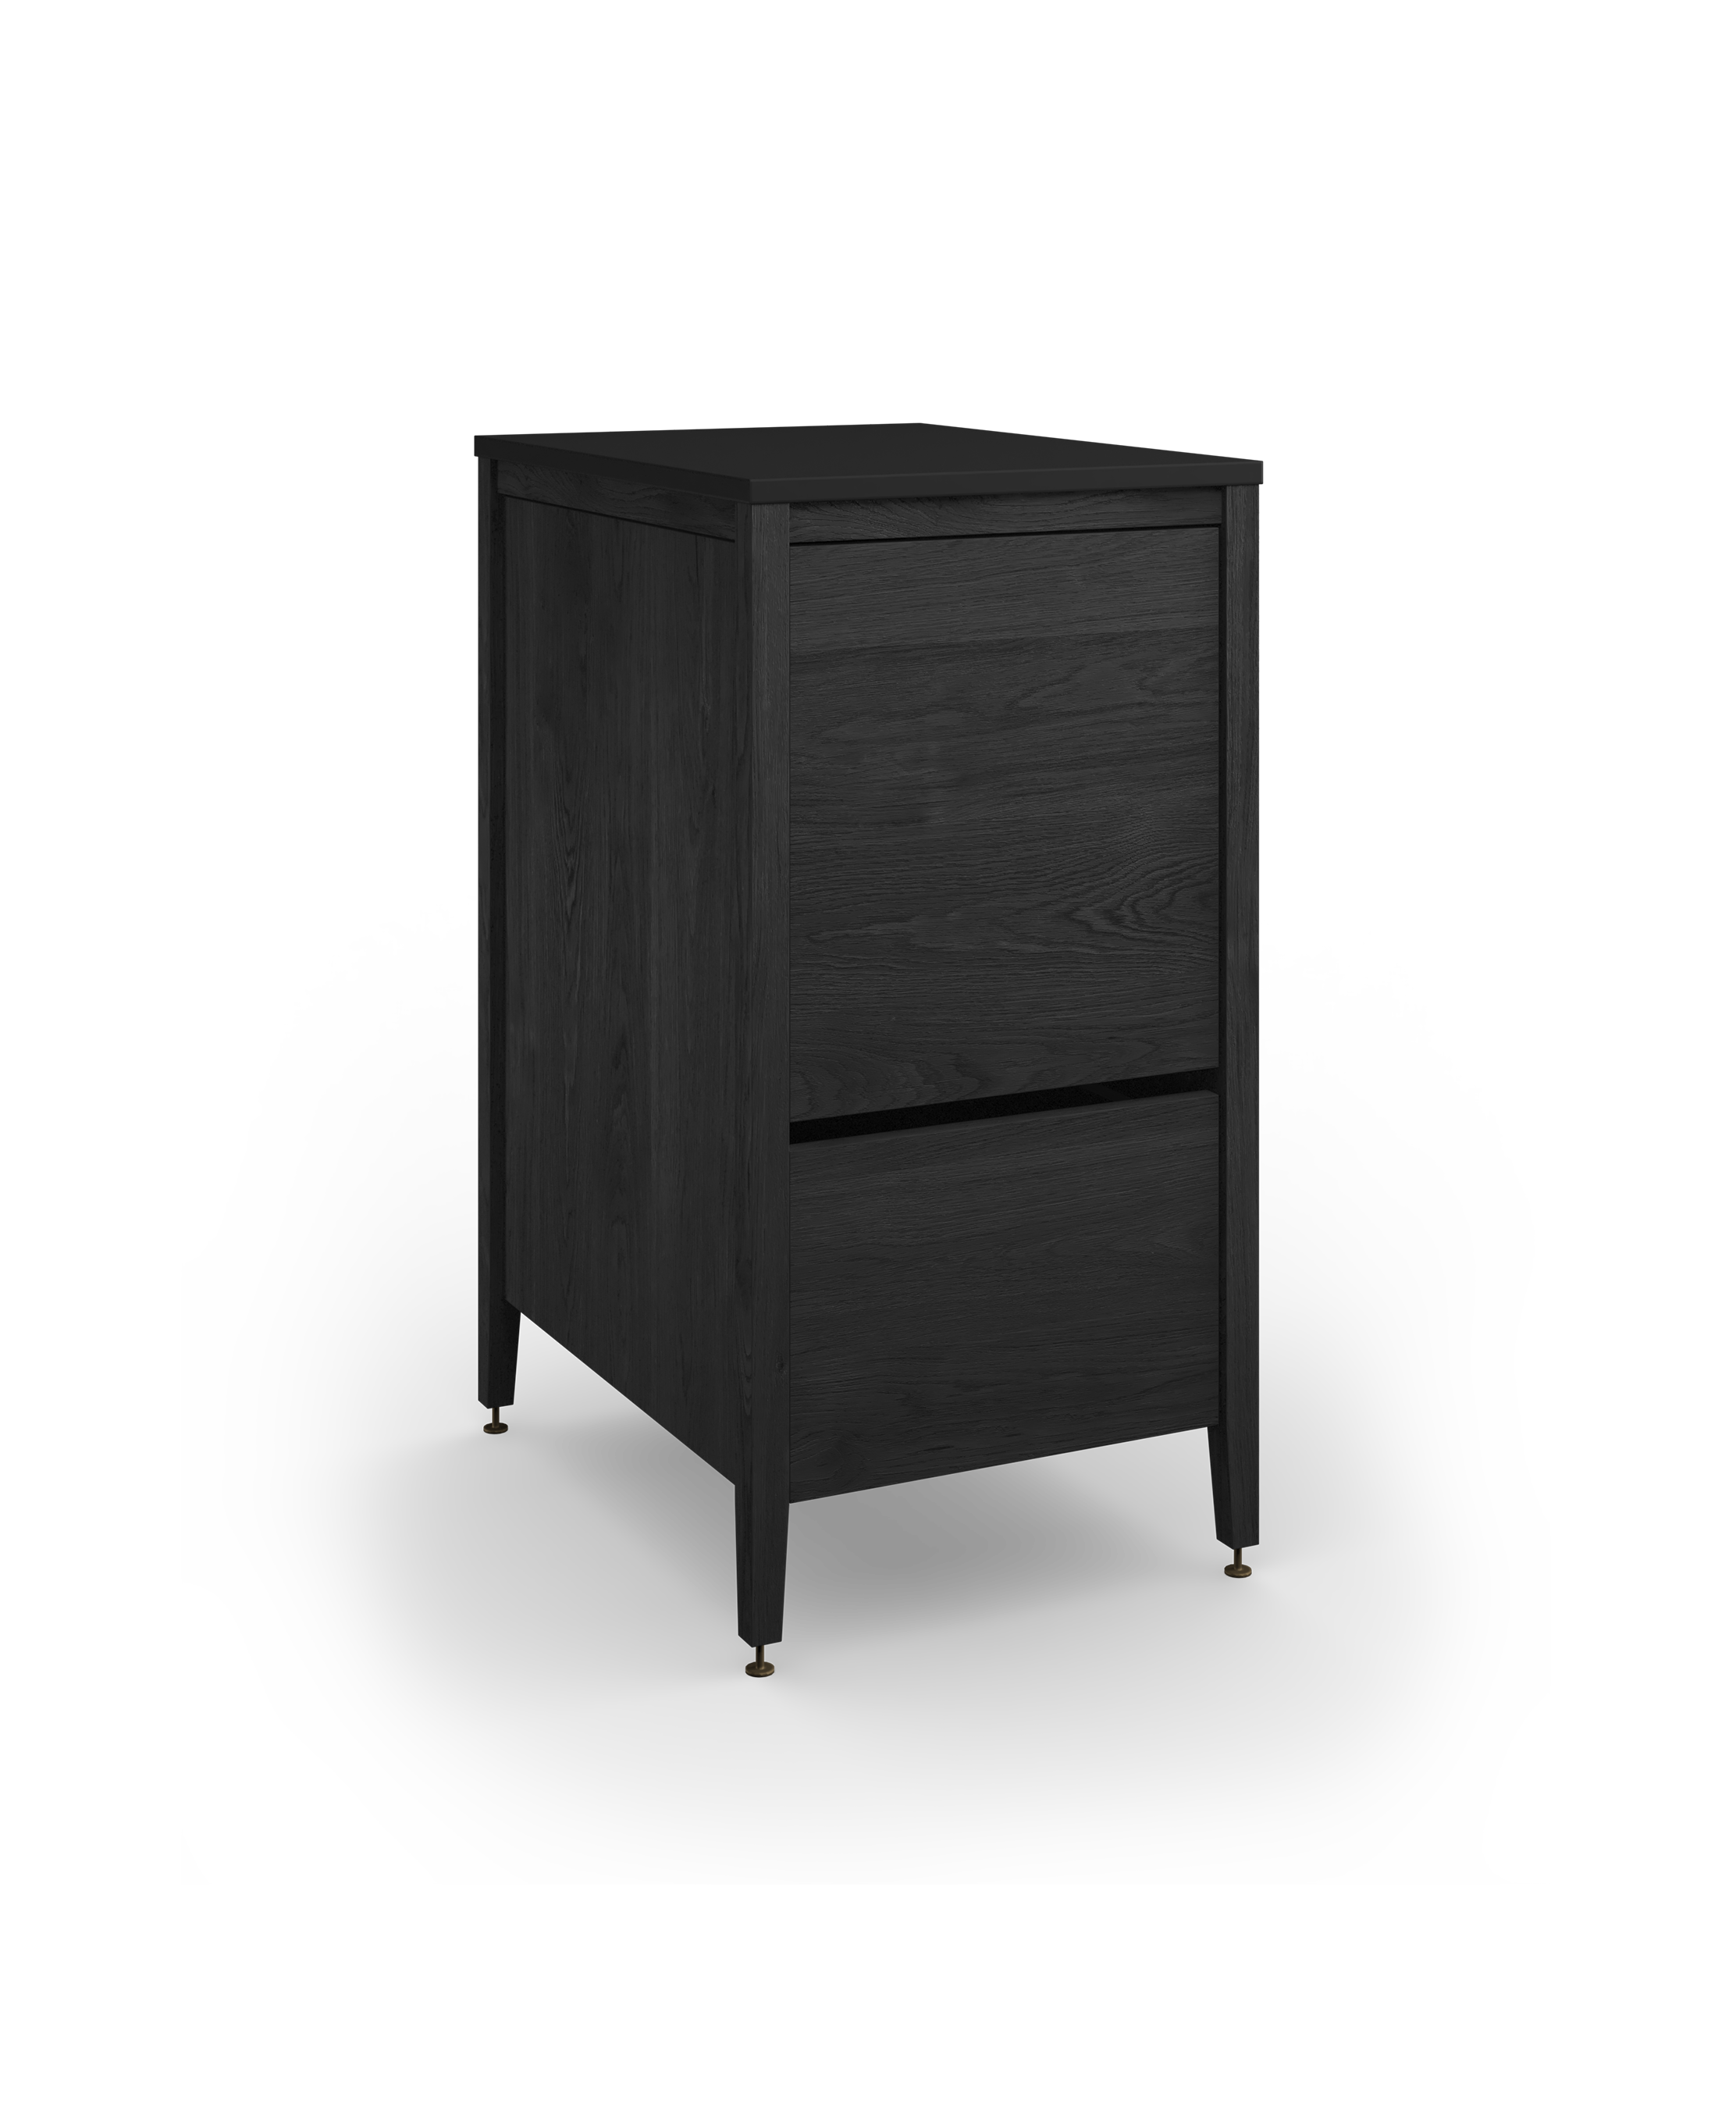 Coquo modular kitchen trash cabinet with two drawers in black stained oak. 